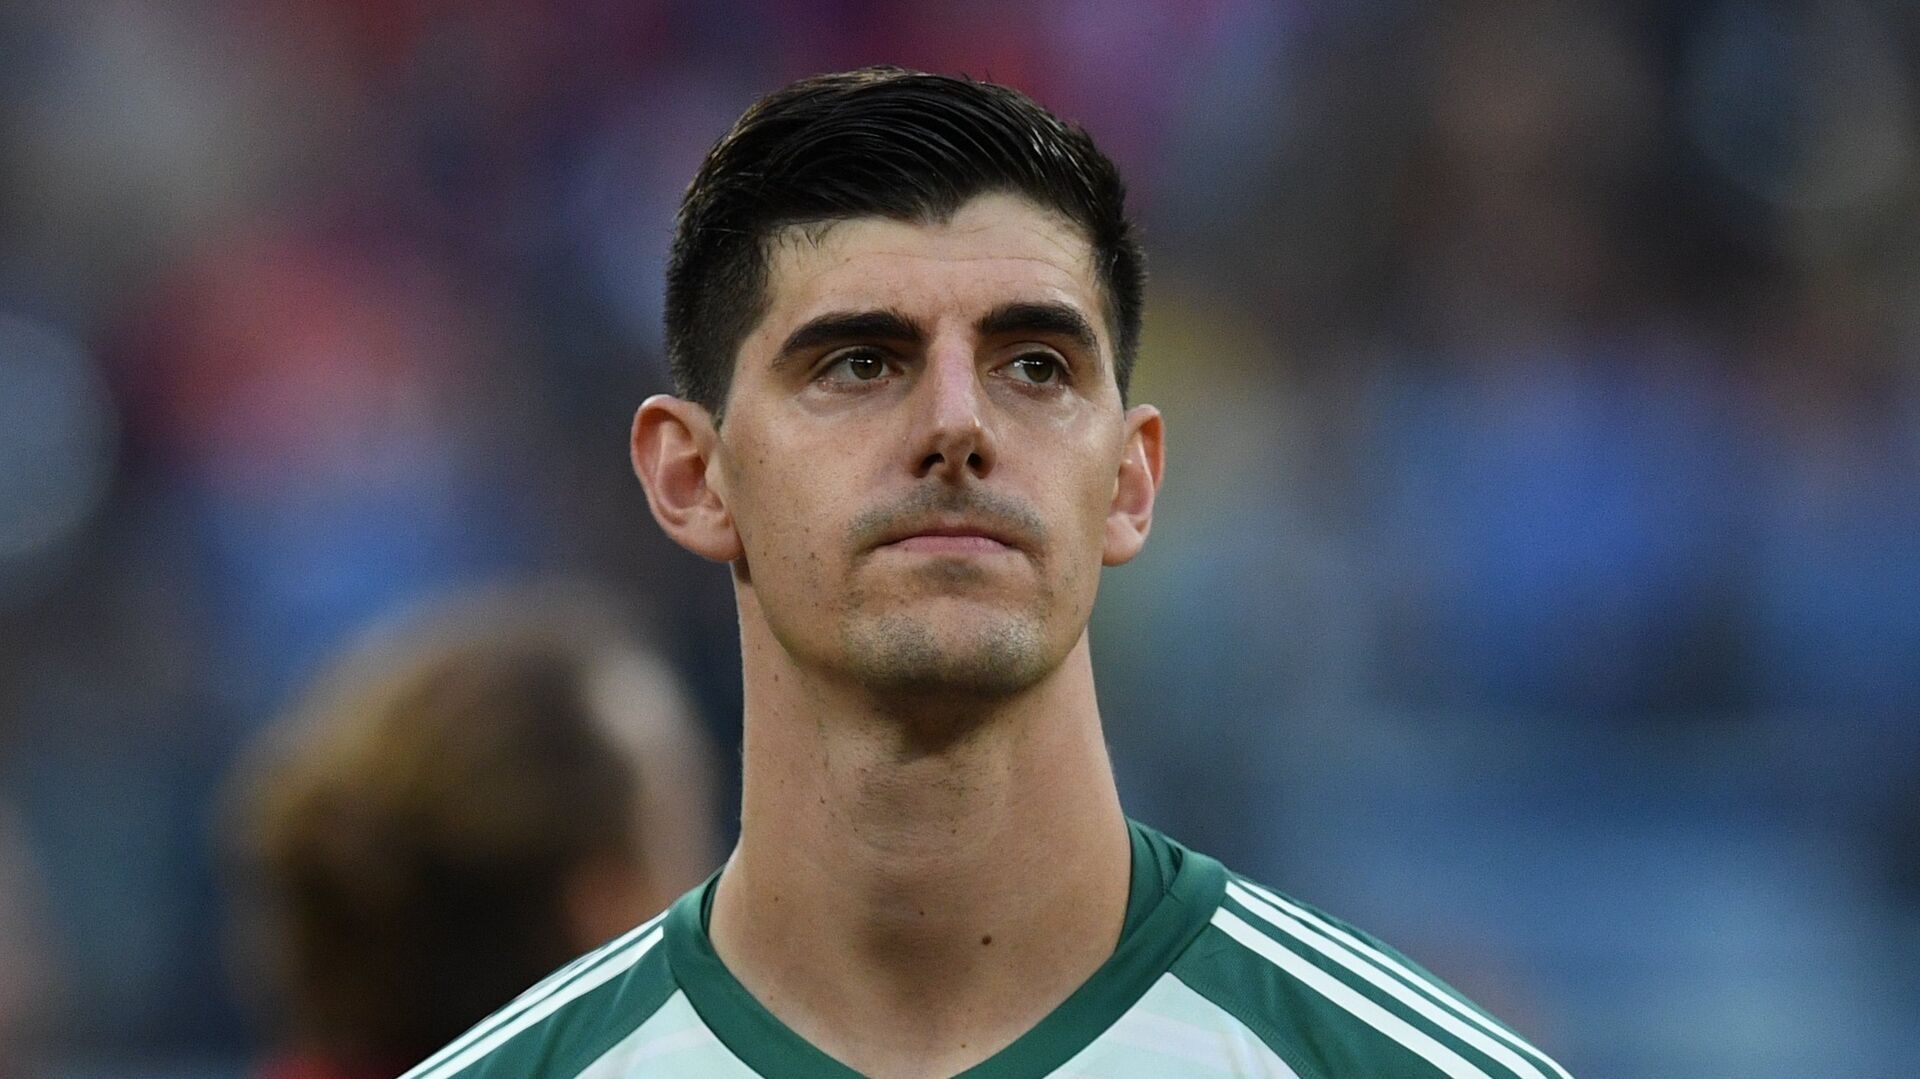 Courtois Set To Make Comeback Against Man City In Champions League Game